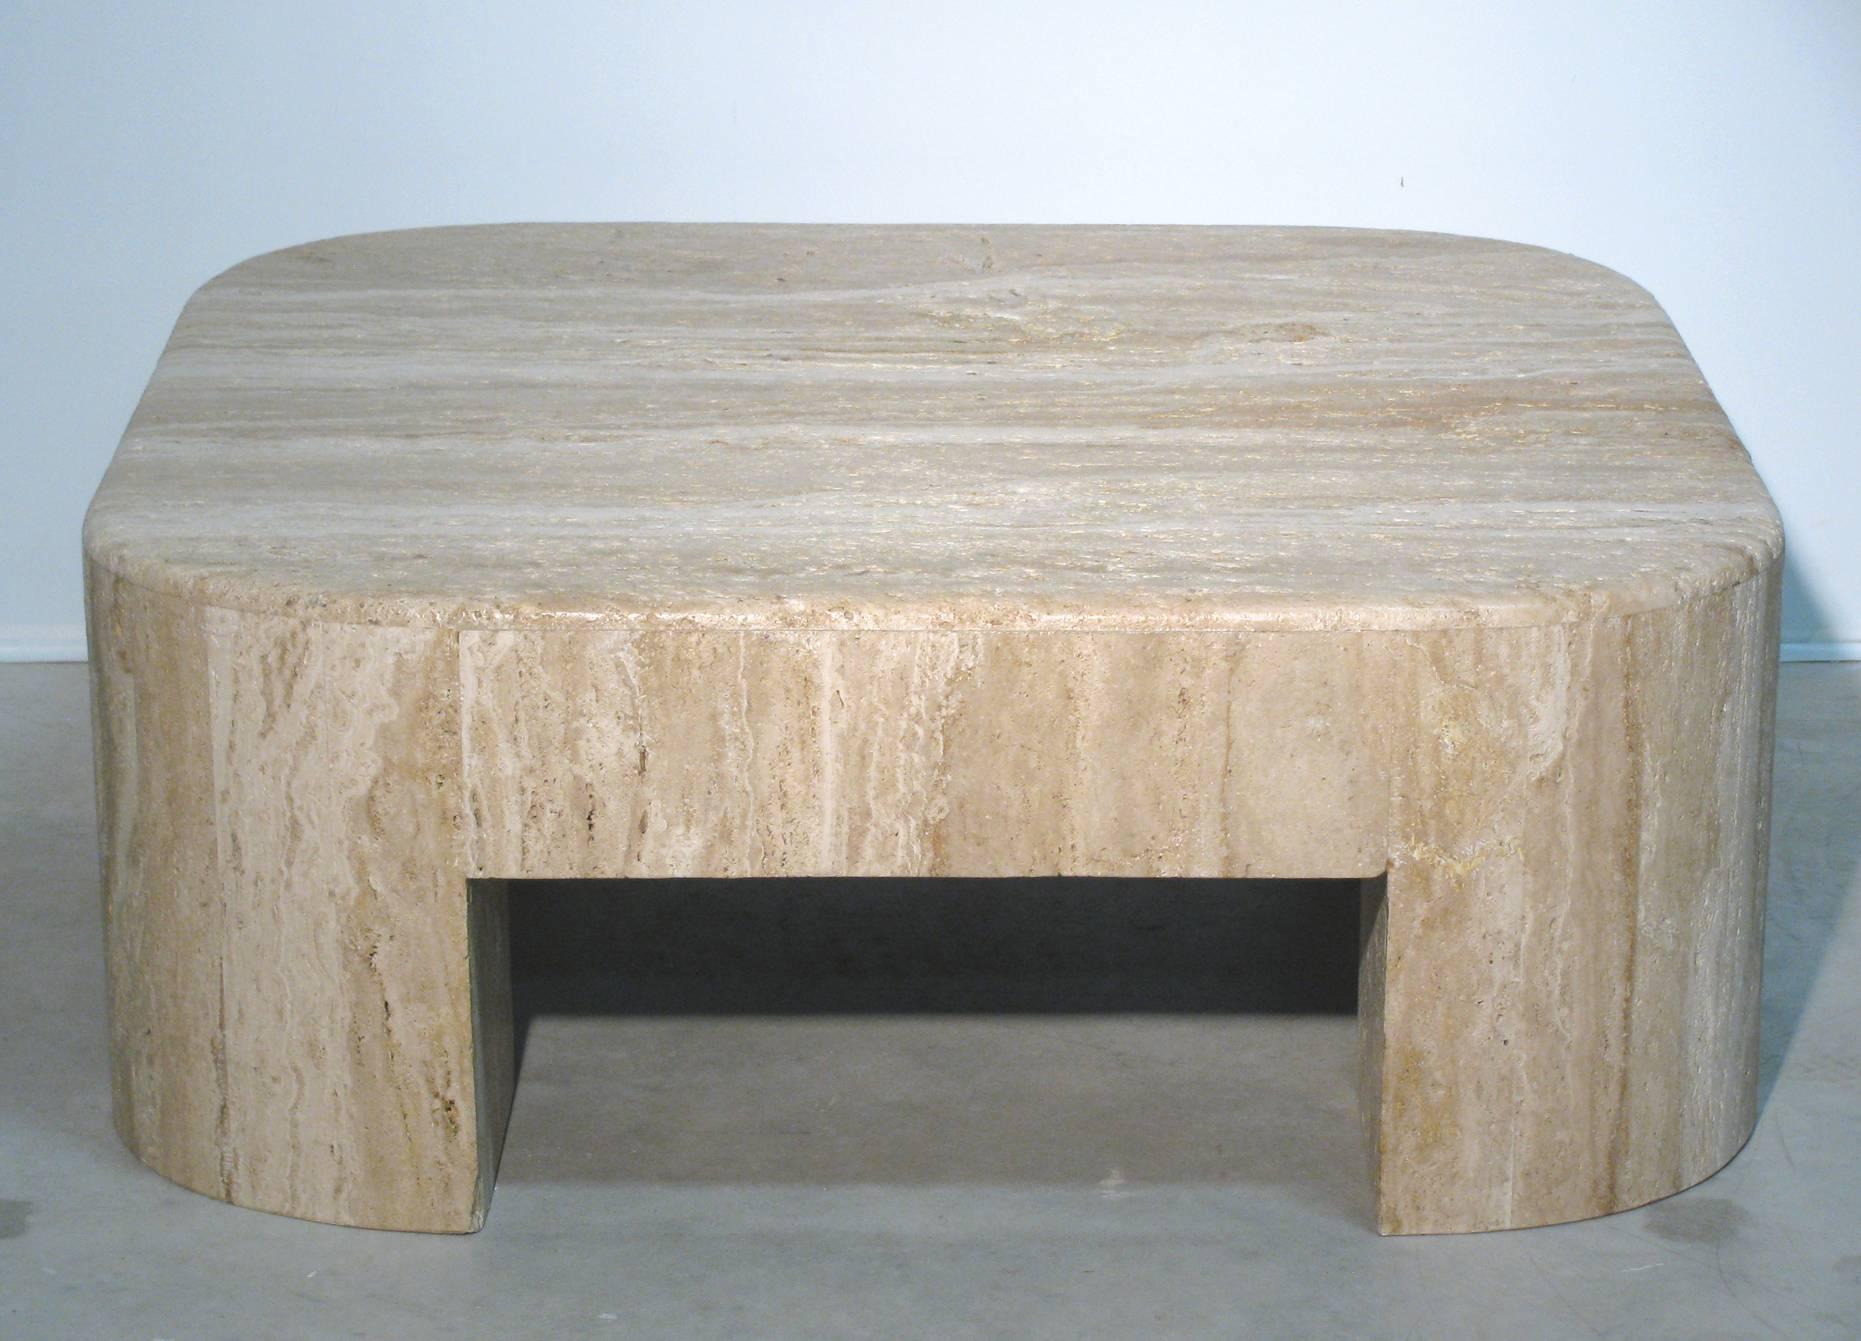 Monumental travertine cocktail or coffee table of natural travertine stone. Square in form with rounded corners. We love the unpolished 